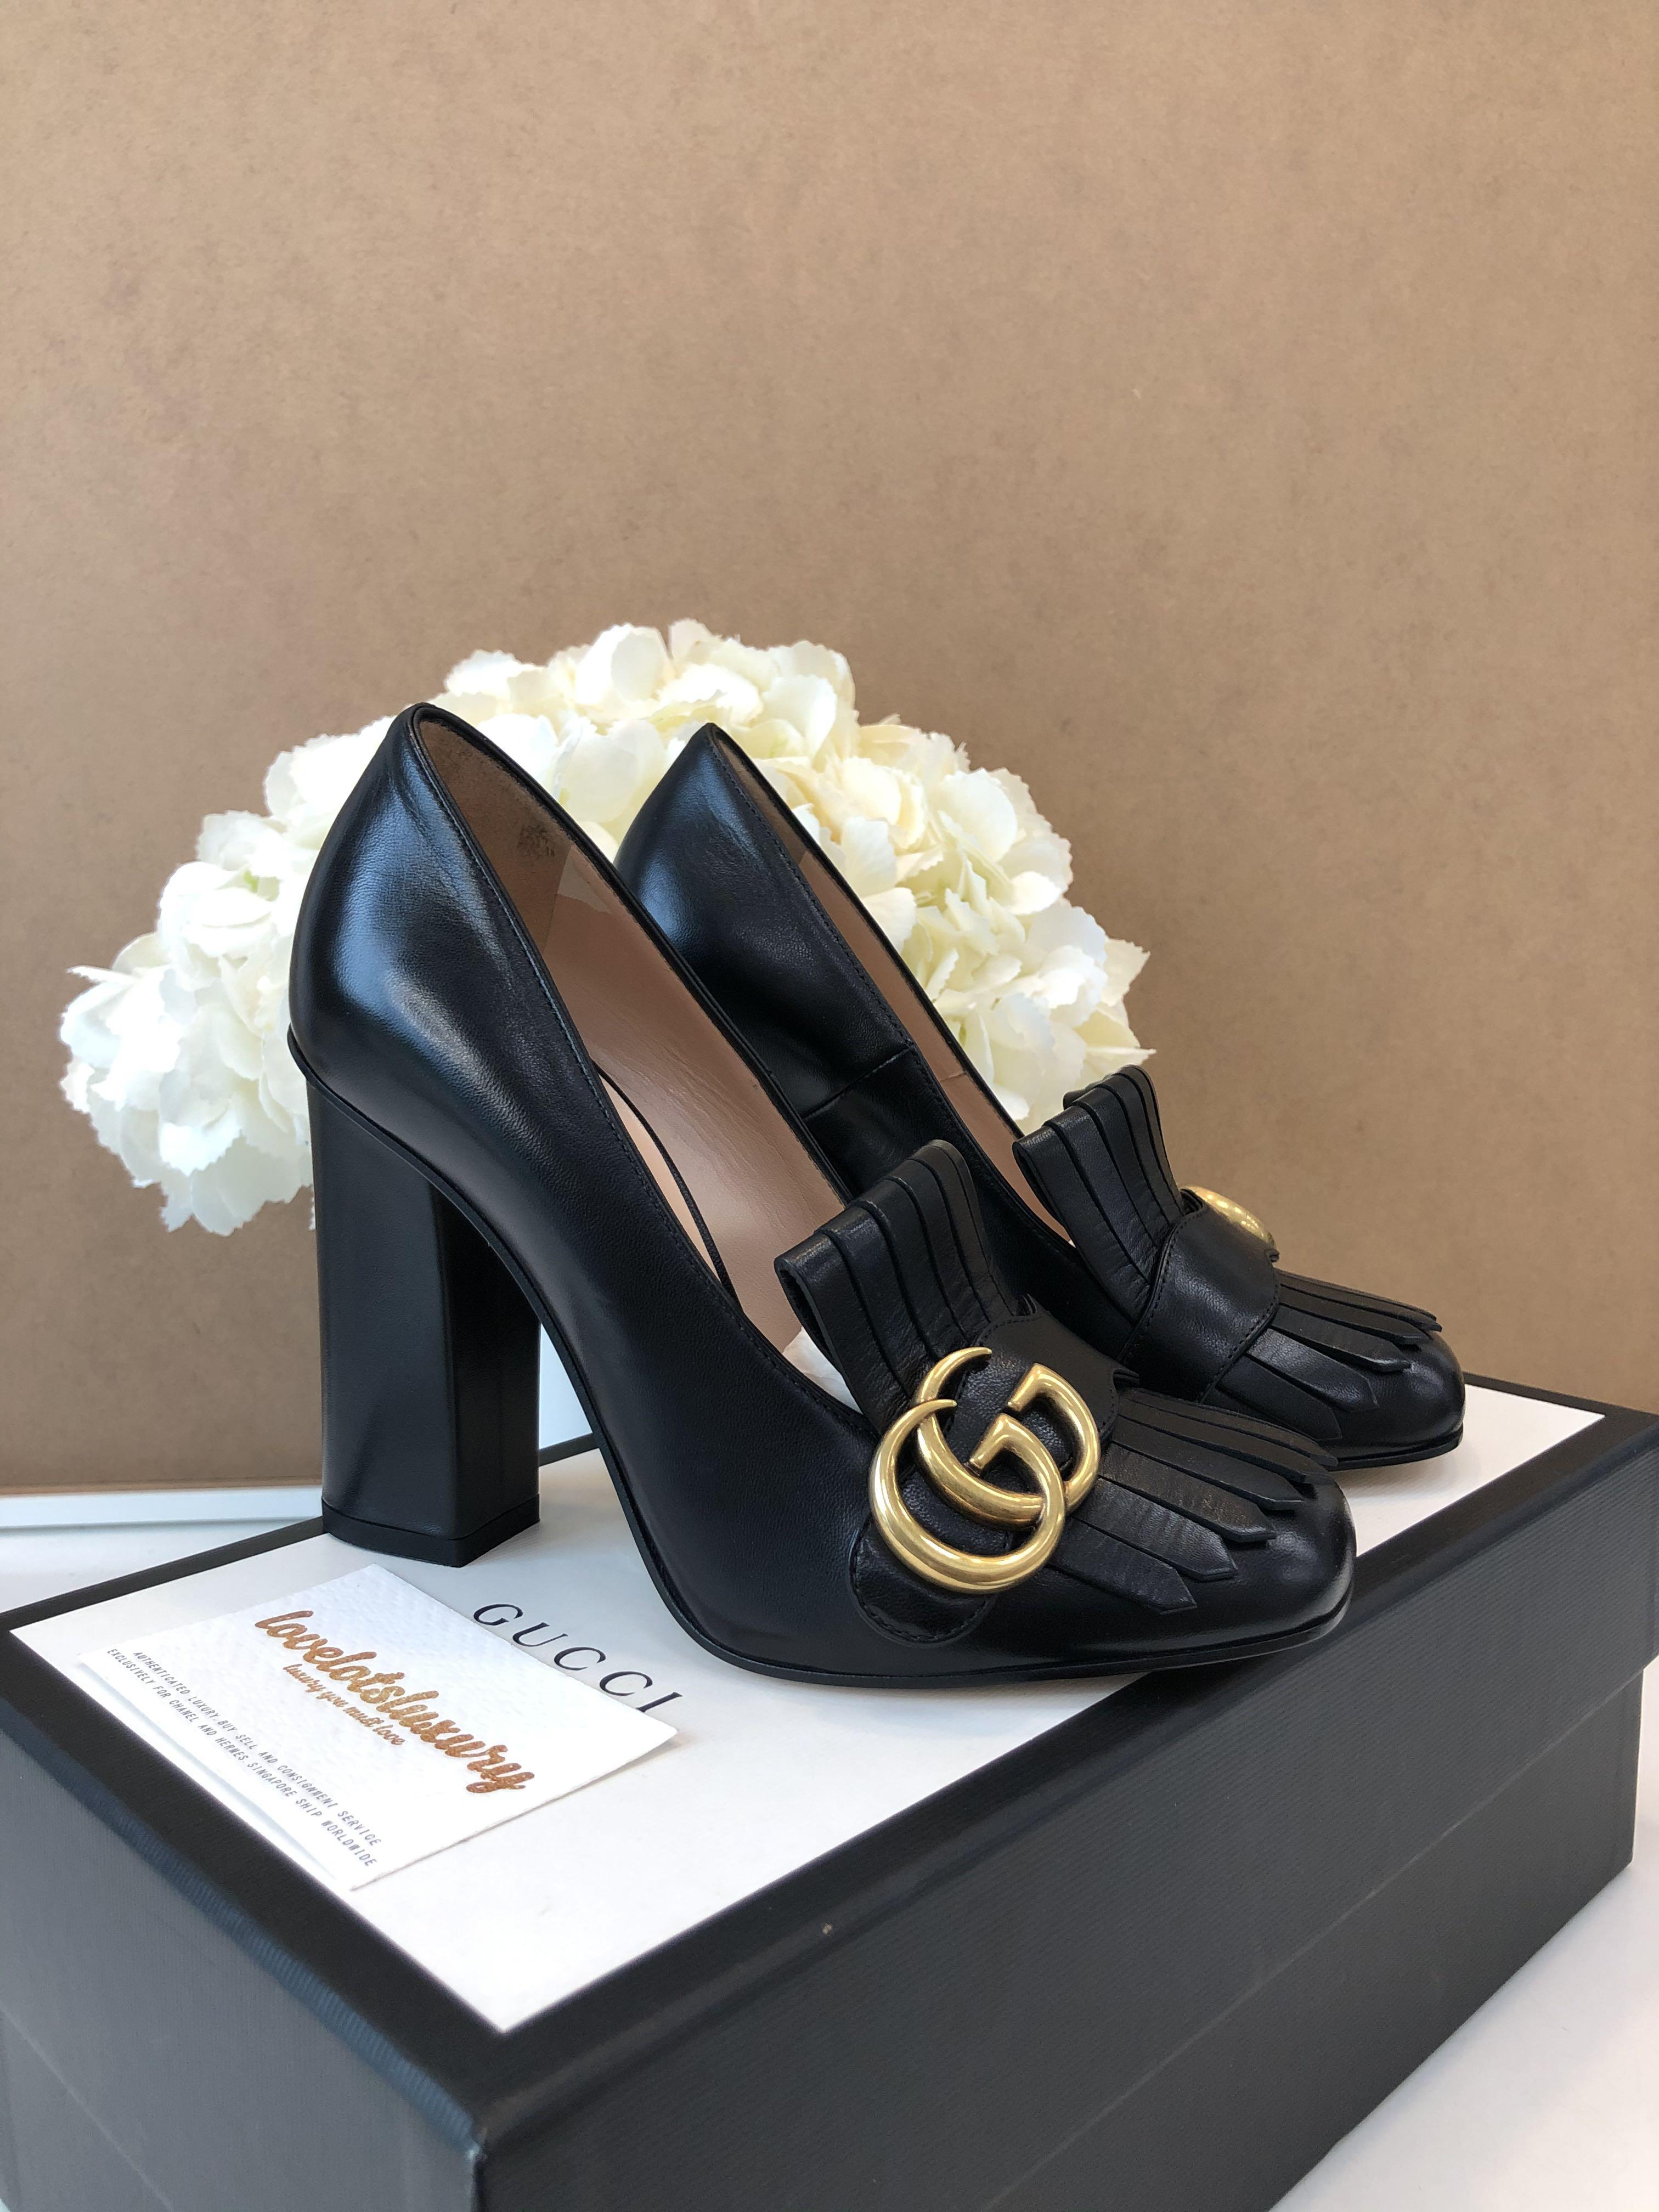 gucci marmont fringed pumps